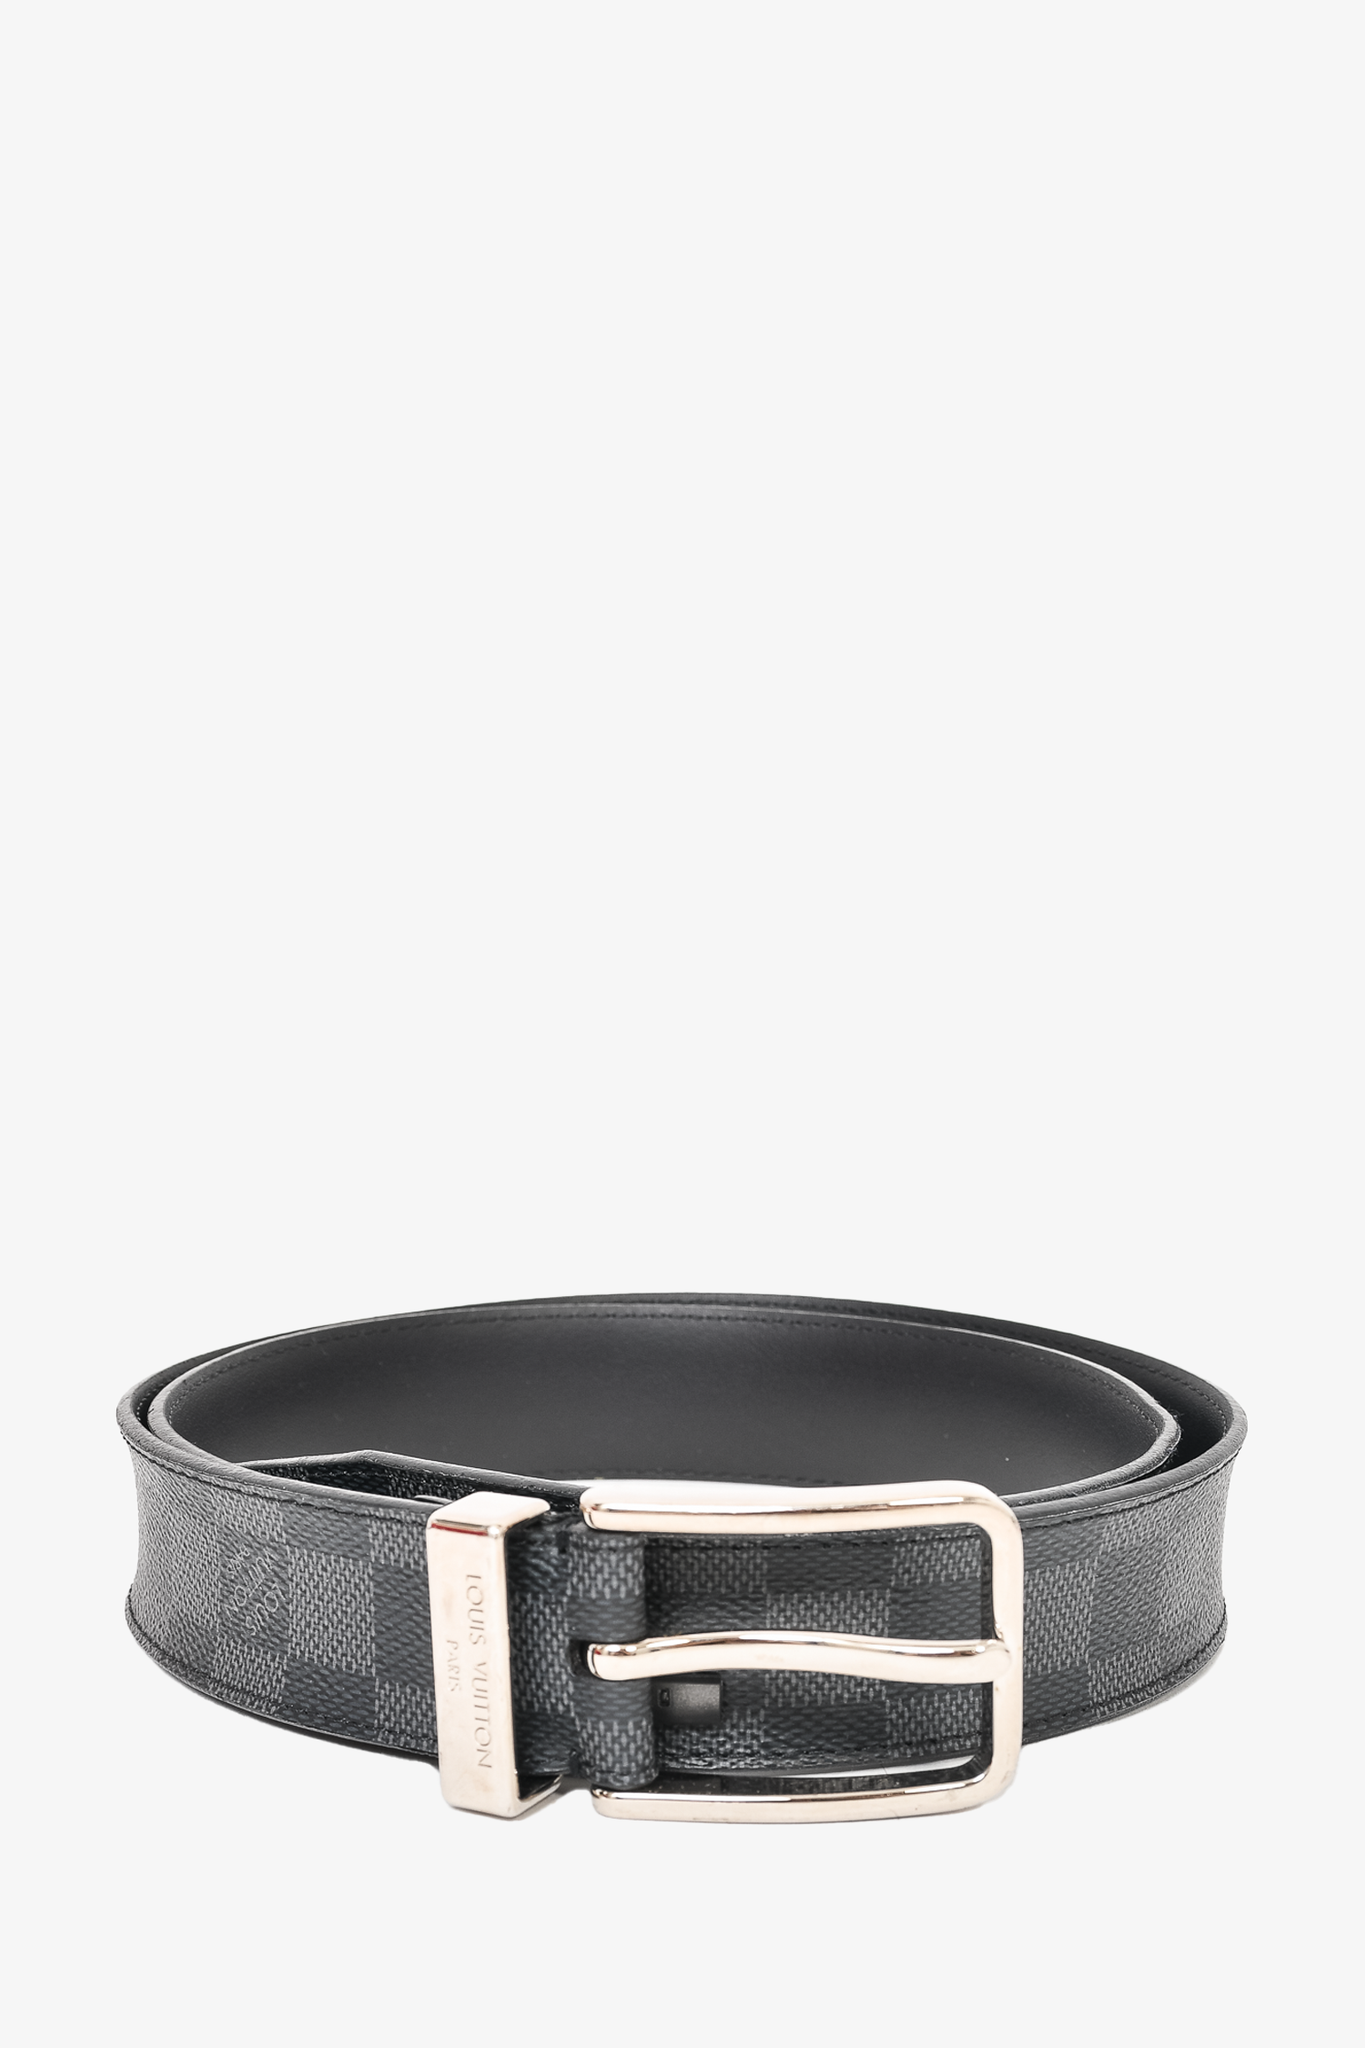 Louis Vuitton Checkered Belt Black with Silver Buckle